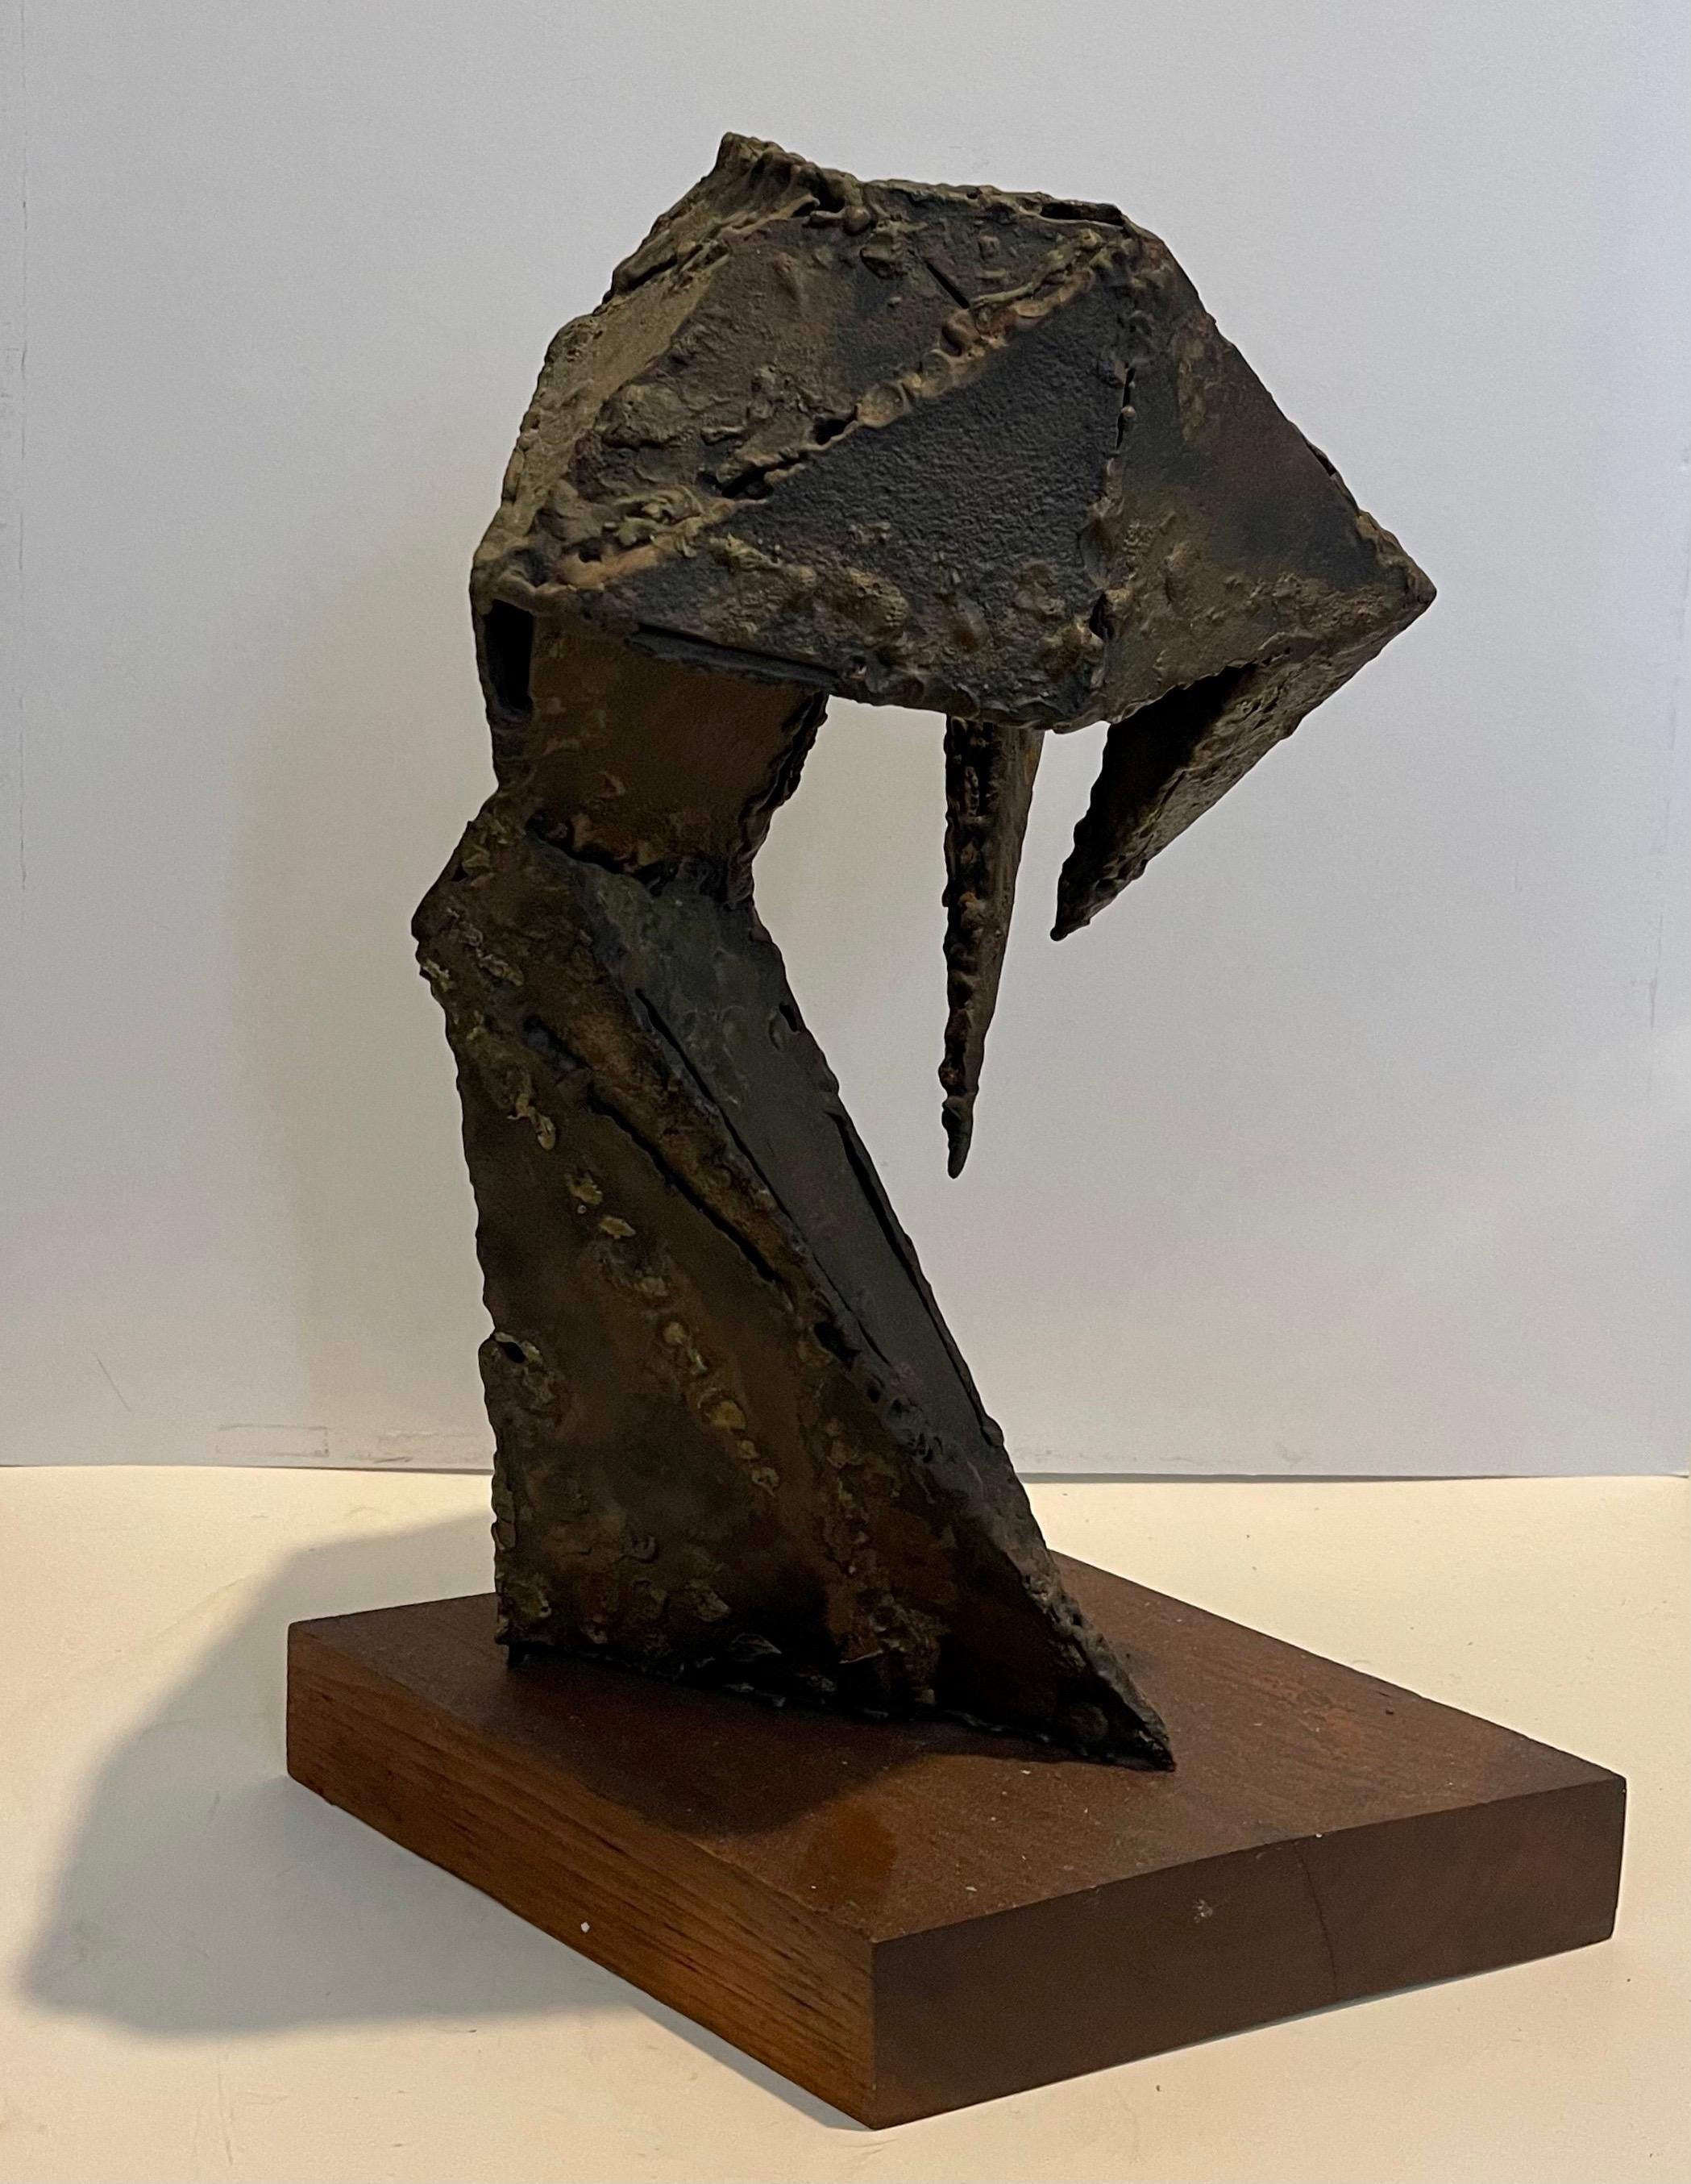 Welded, brazed sculpture on wooden base
This is not signed or dated

This work is unsigned. We were told it was the work of Seymour Lipton but as there is further documentation we are selling it as attributed and cannot guarantee it as such.

